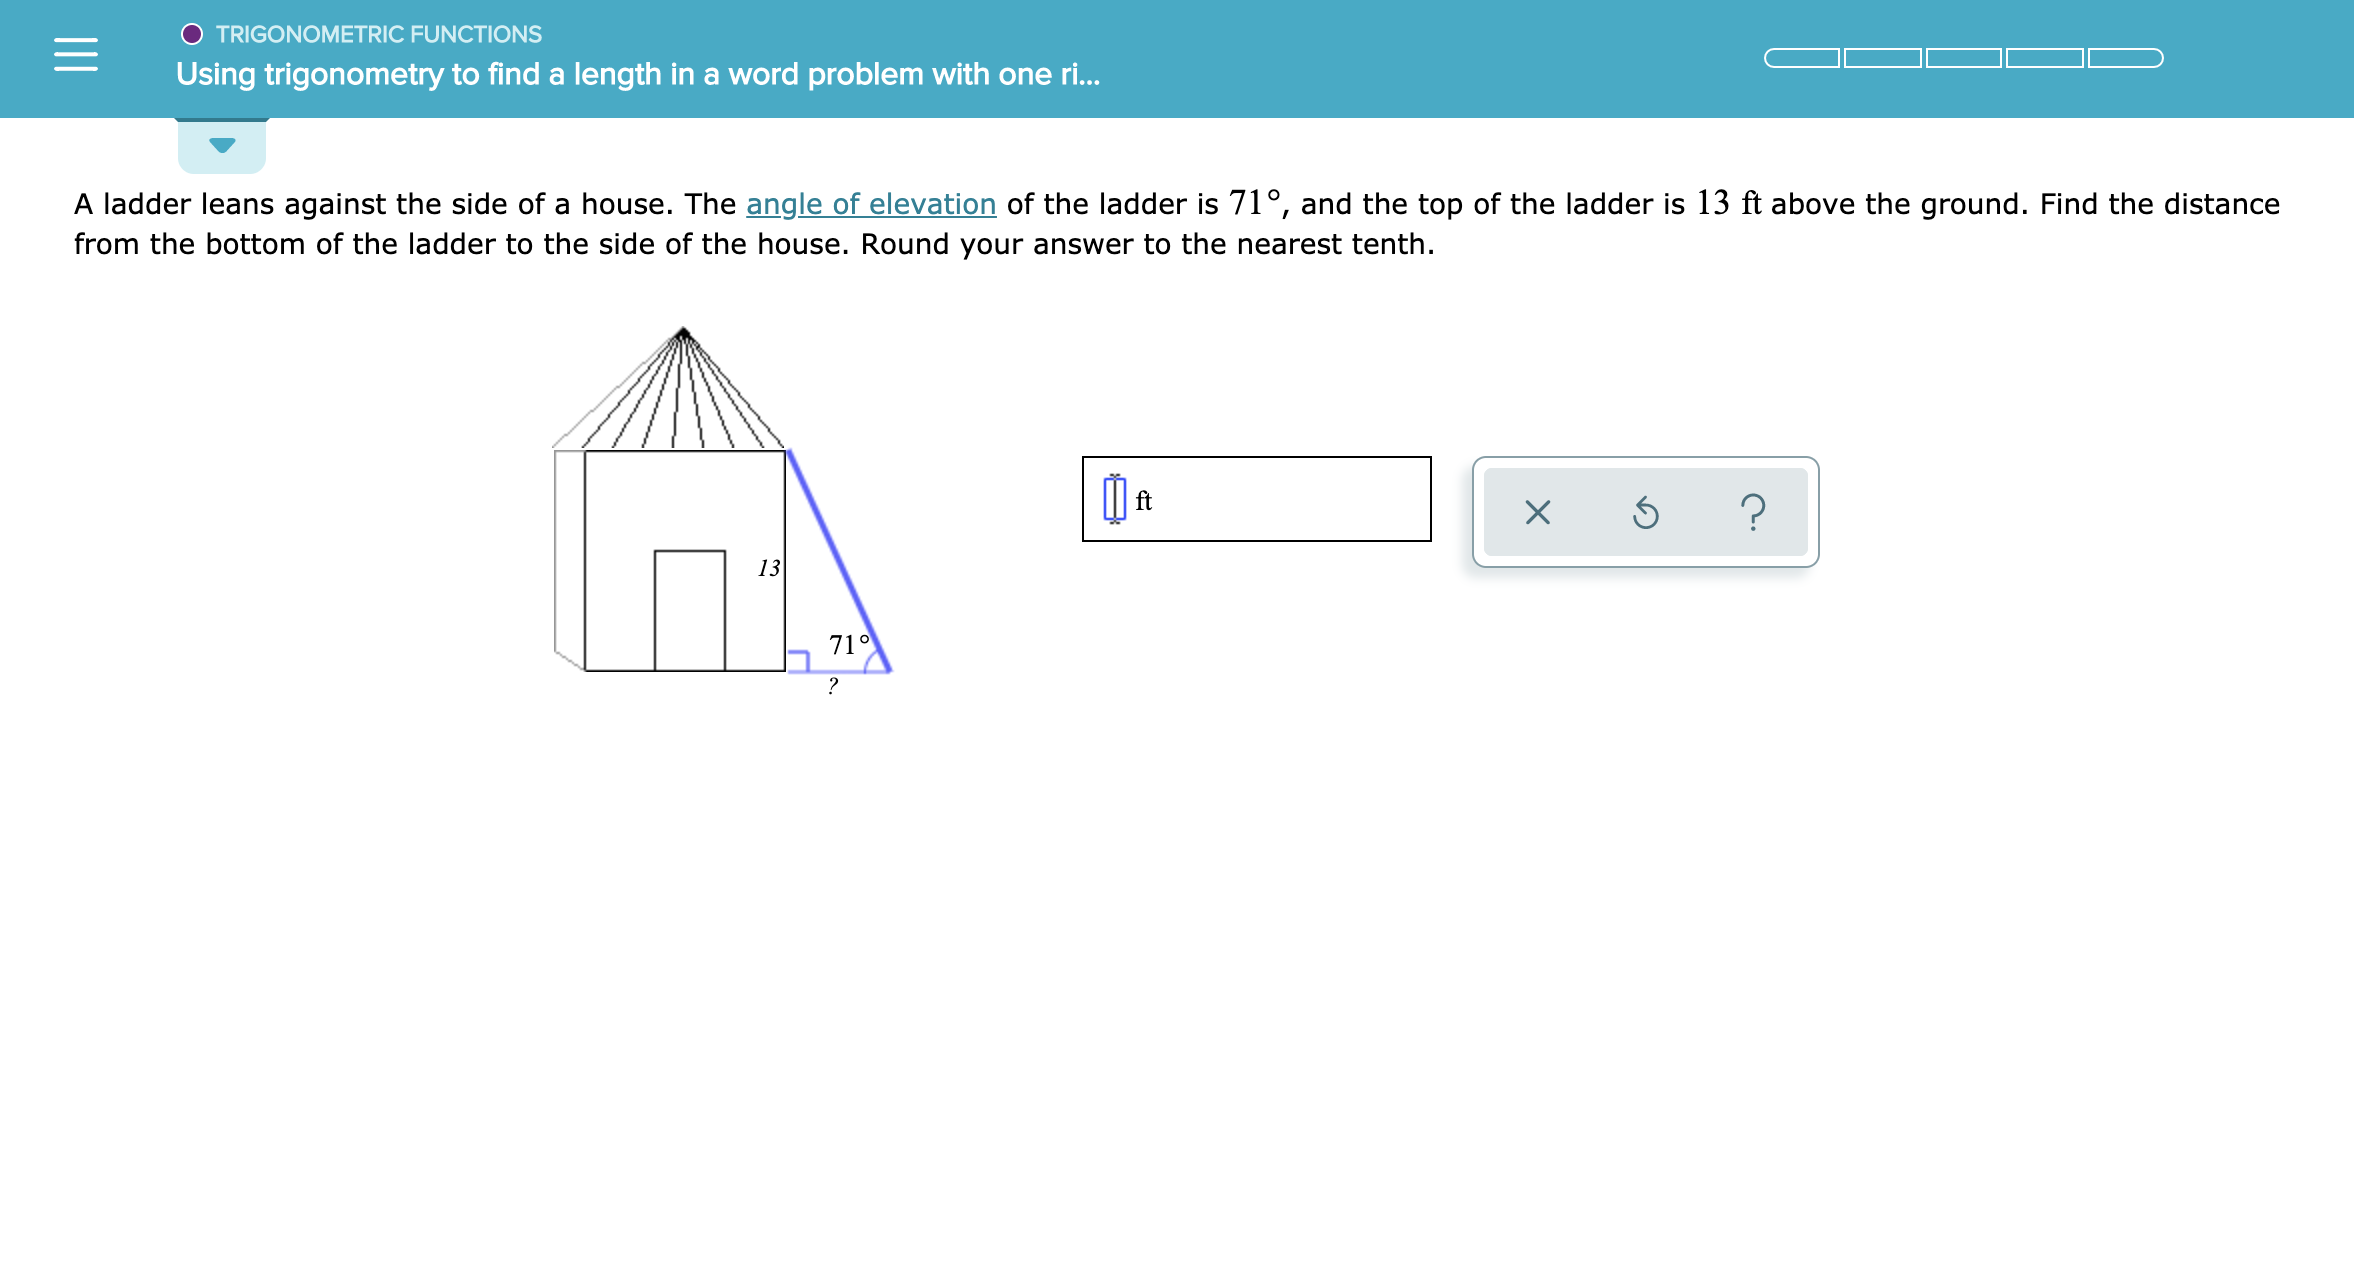 TRIGONOMETRIC FUNCTIONS
Using trigonometry to find a length in a word problem with one r...
A ladder leans against the side of a house. The angle of elevation of the ladder is 71°, and the top of the ladder is 13 ft above the ground. Find the distance
from the bottom of the ladder to the side of the house. Round your answer to the nearest tenth
?
13
71°
?
